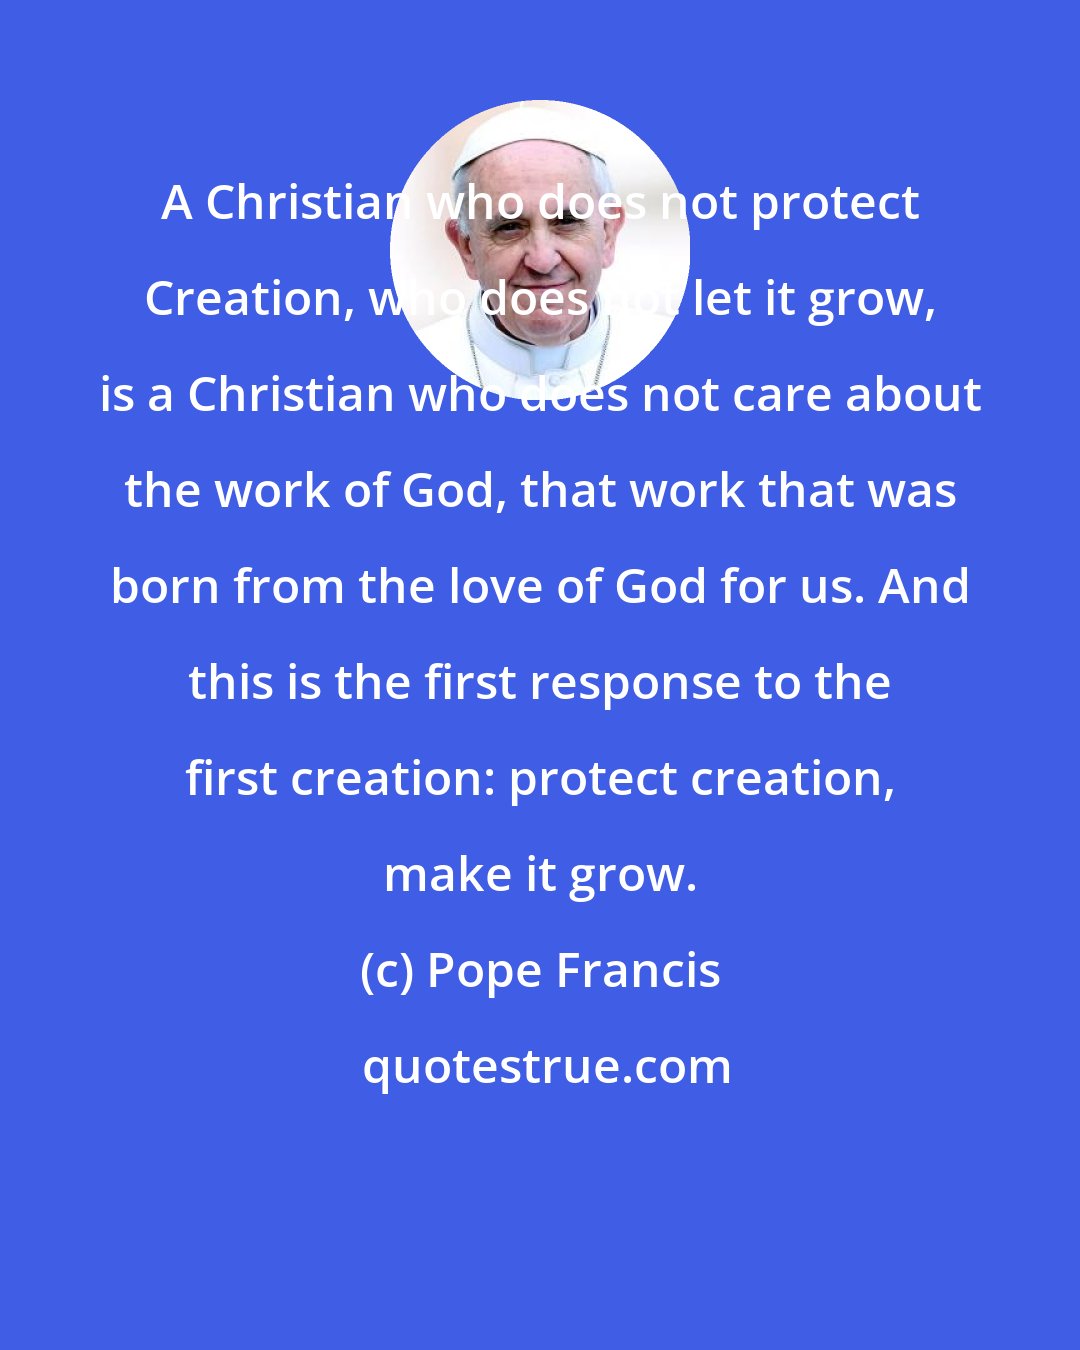 Pope Francis: A Christian who does not protect Creation, who does not let it grow, is a Christian who does not care about the work of God, that work that was born from the love of God for us. And this is the first response to the first creation: protect creation, make it grow.